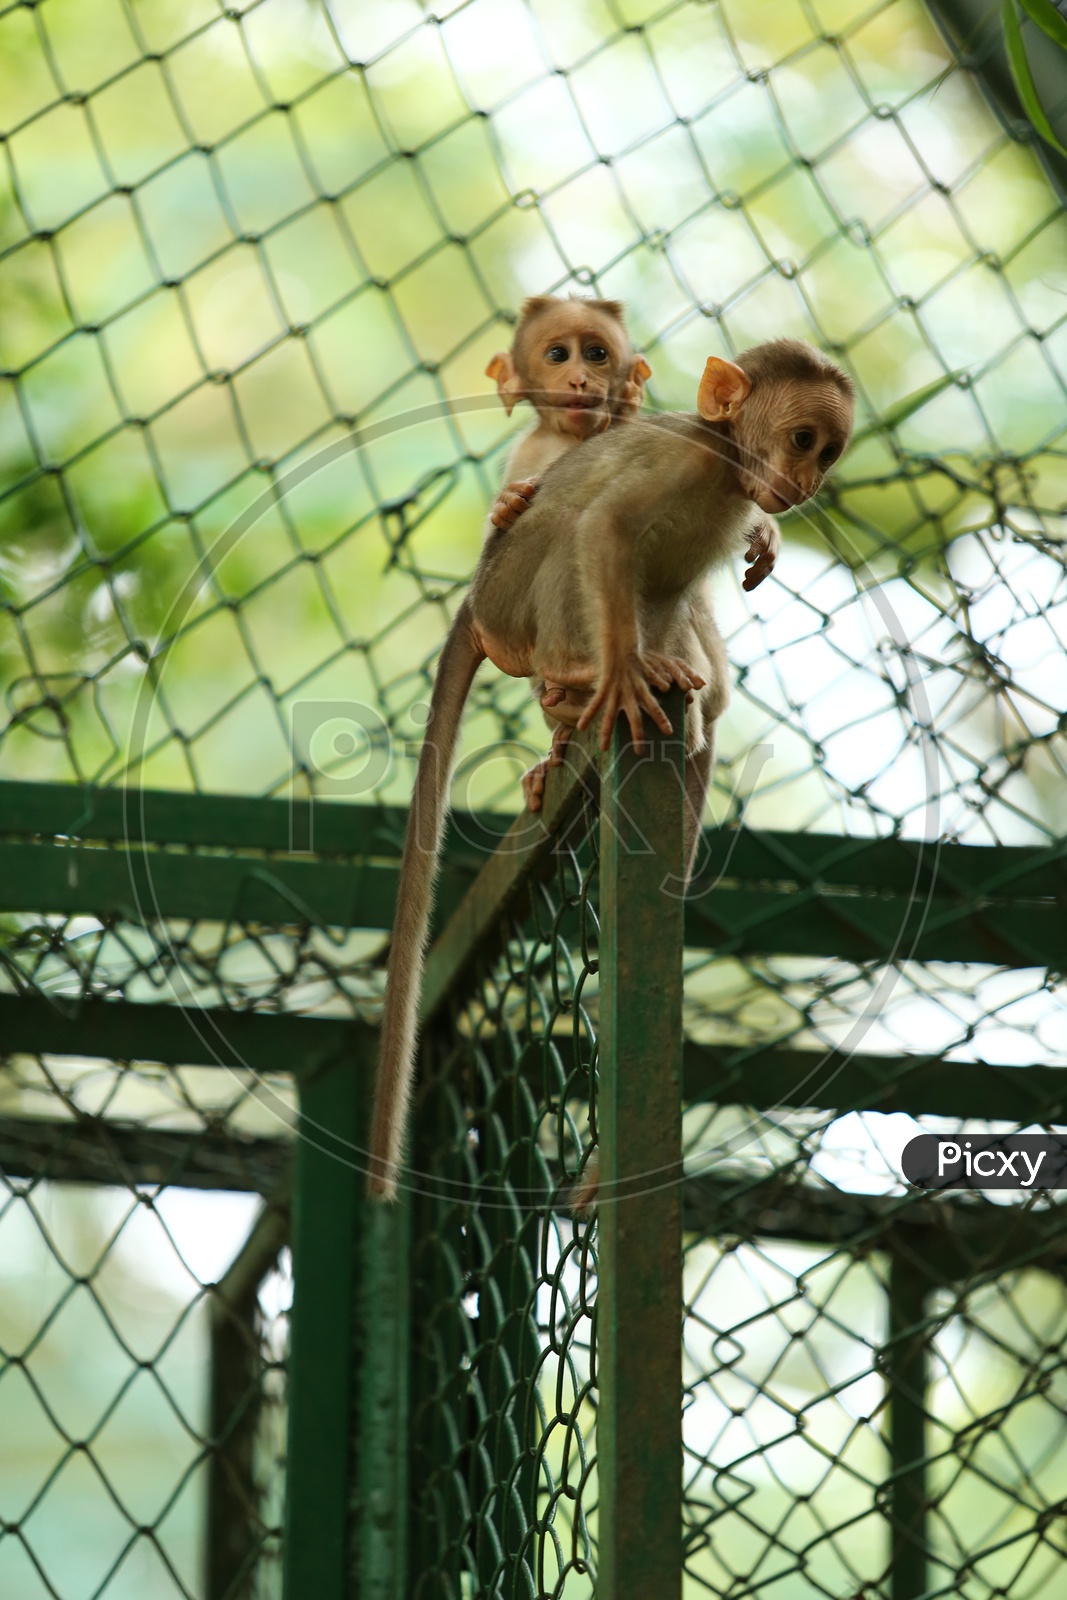 Young Indian Monkey Or Macaque In a Zoo Cage Backdrop